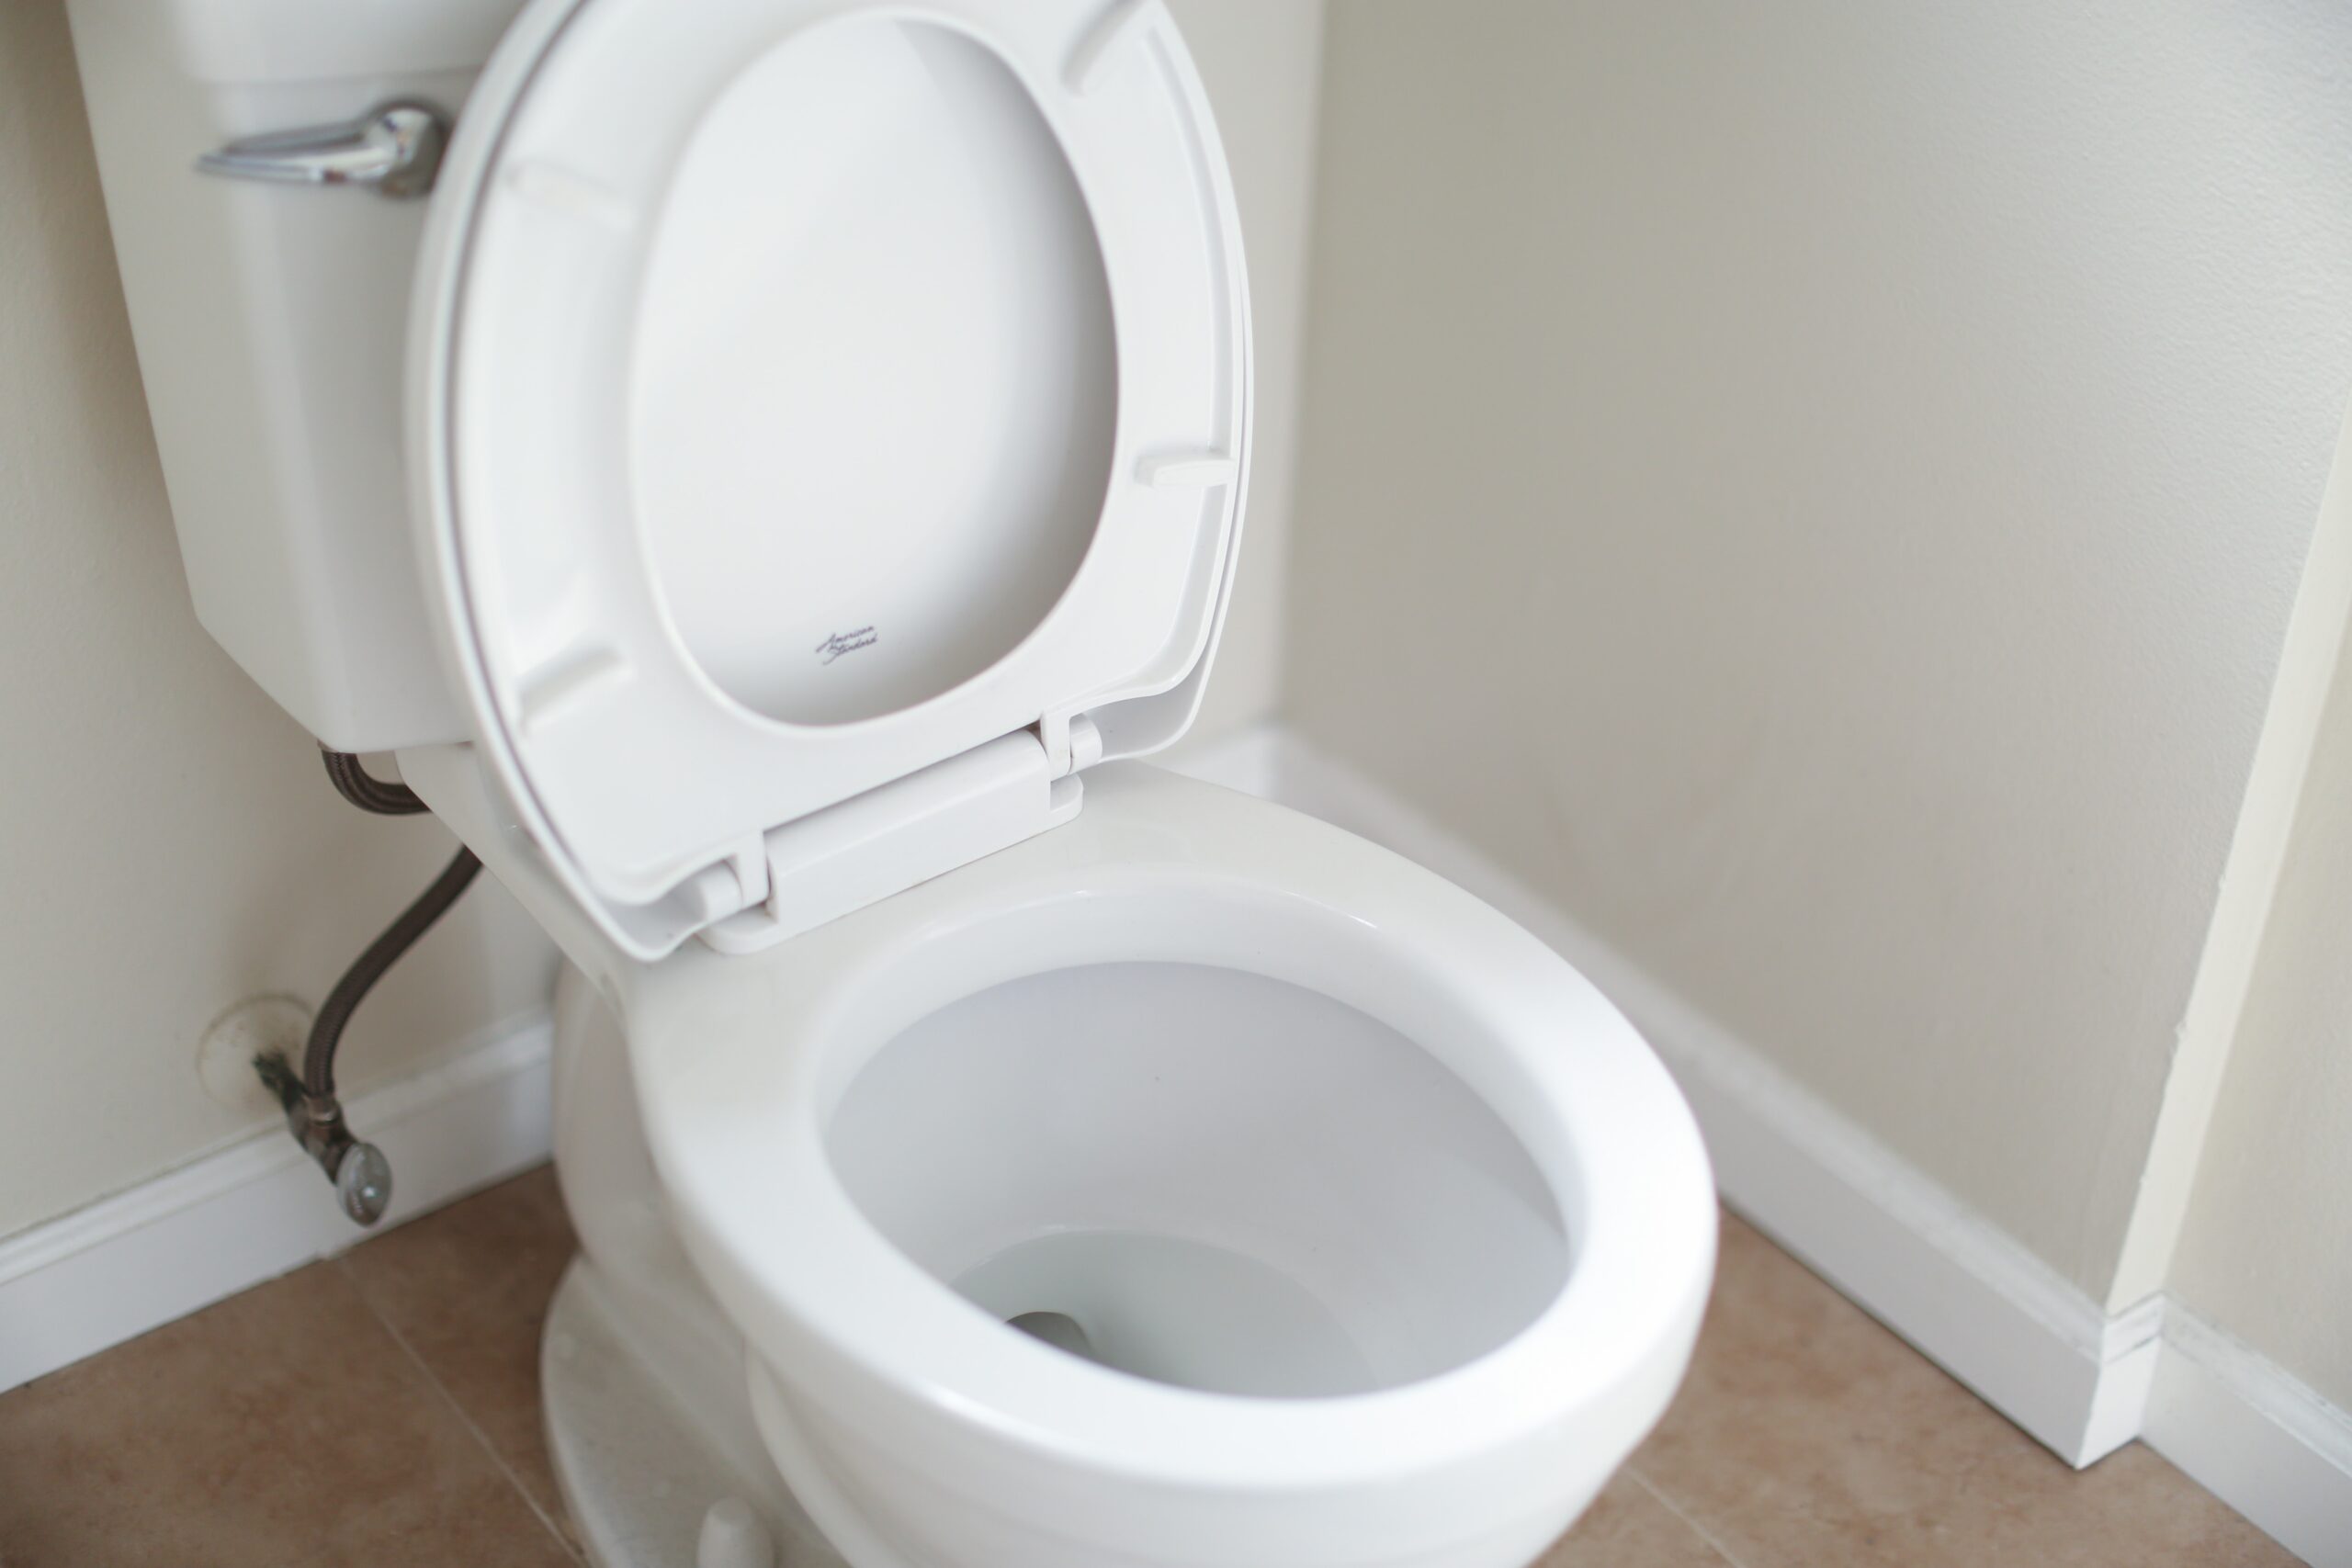 How to Vent a Toilet Without a Vent - No Need to Go Through the Roof